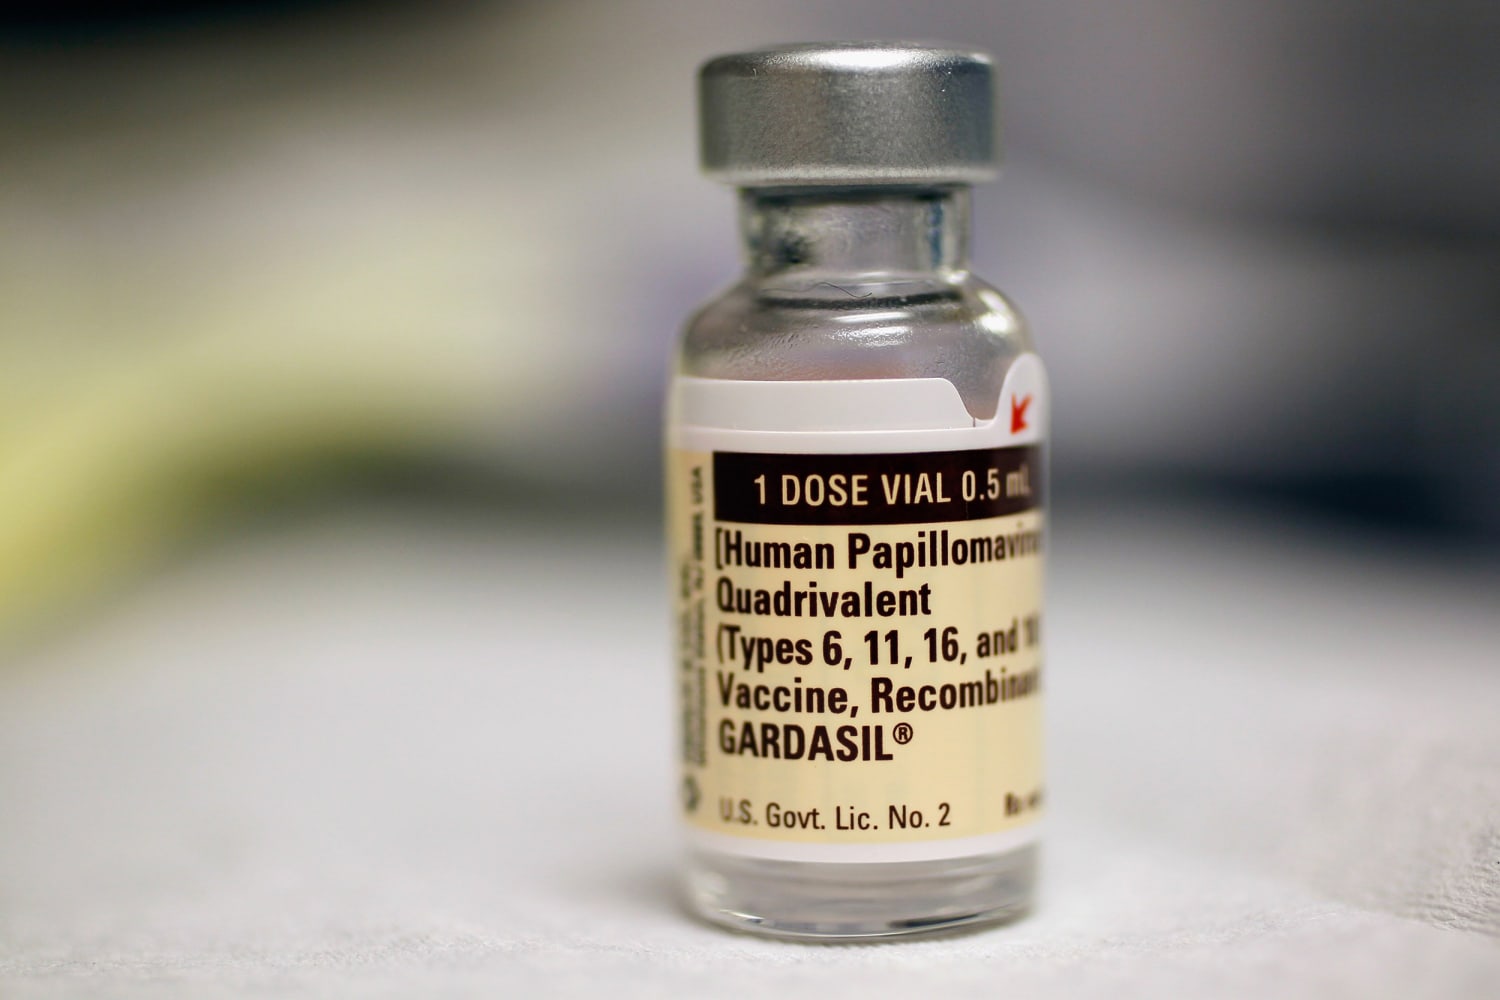 Hpv vaccine debate - Hpv doesnt cause cancer